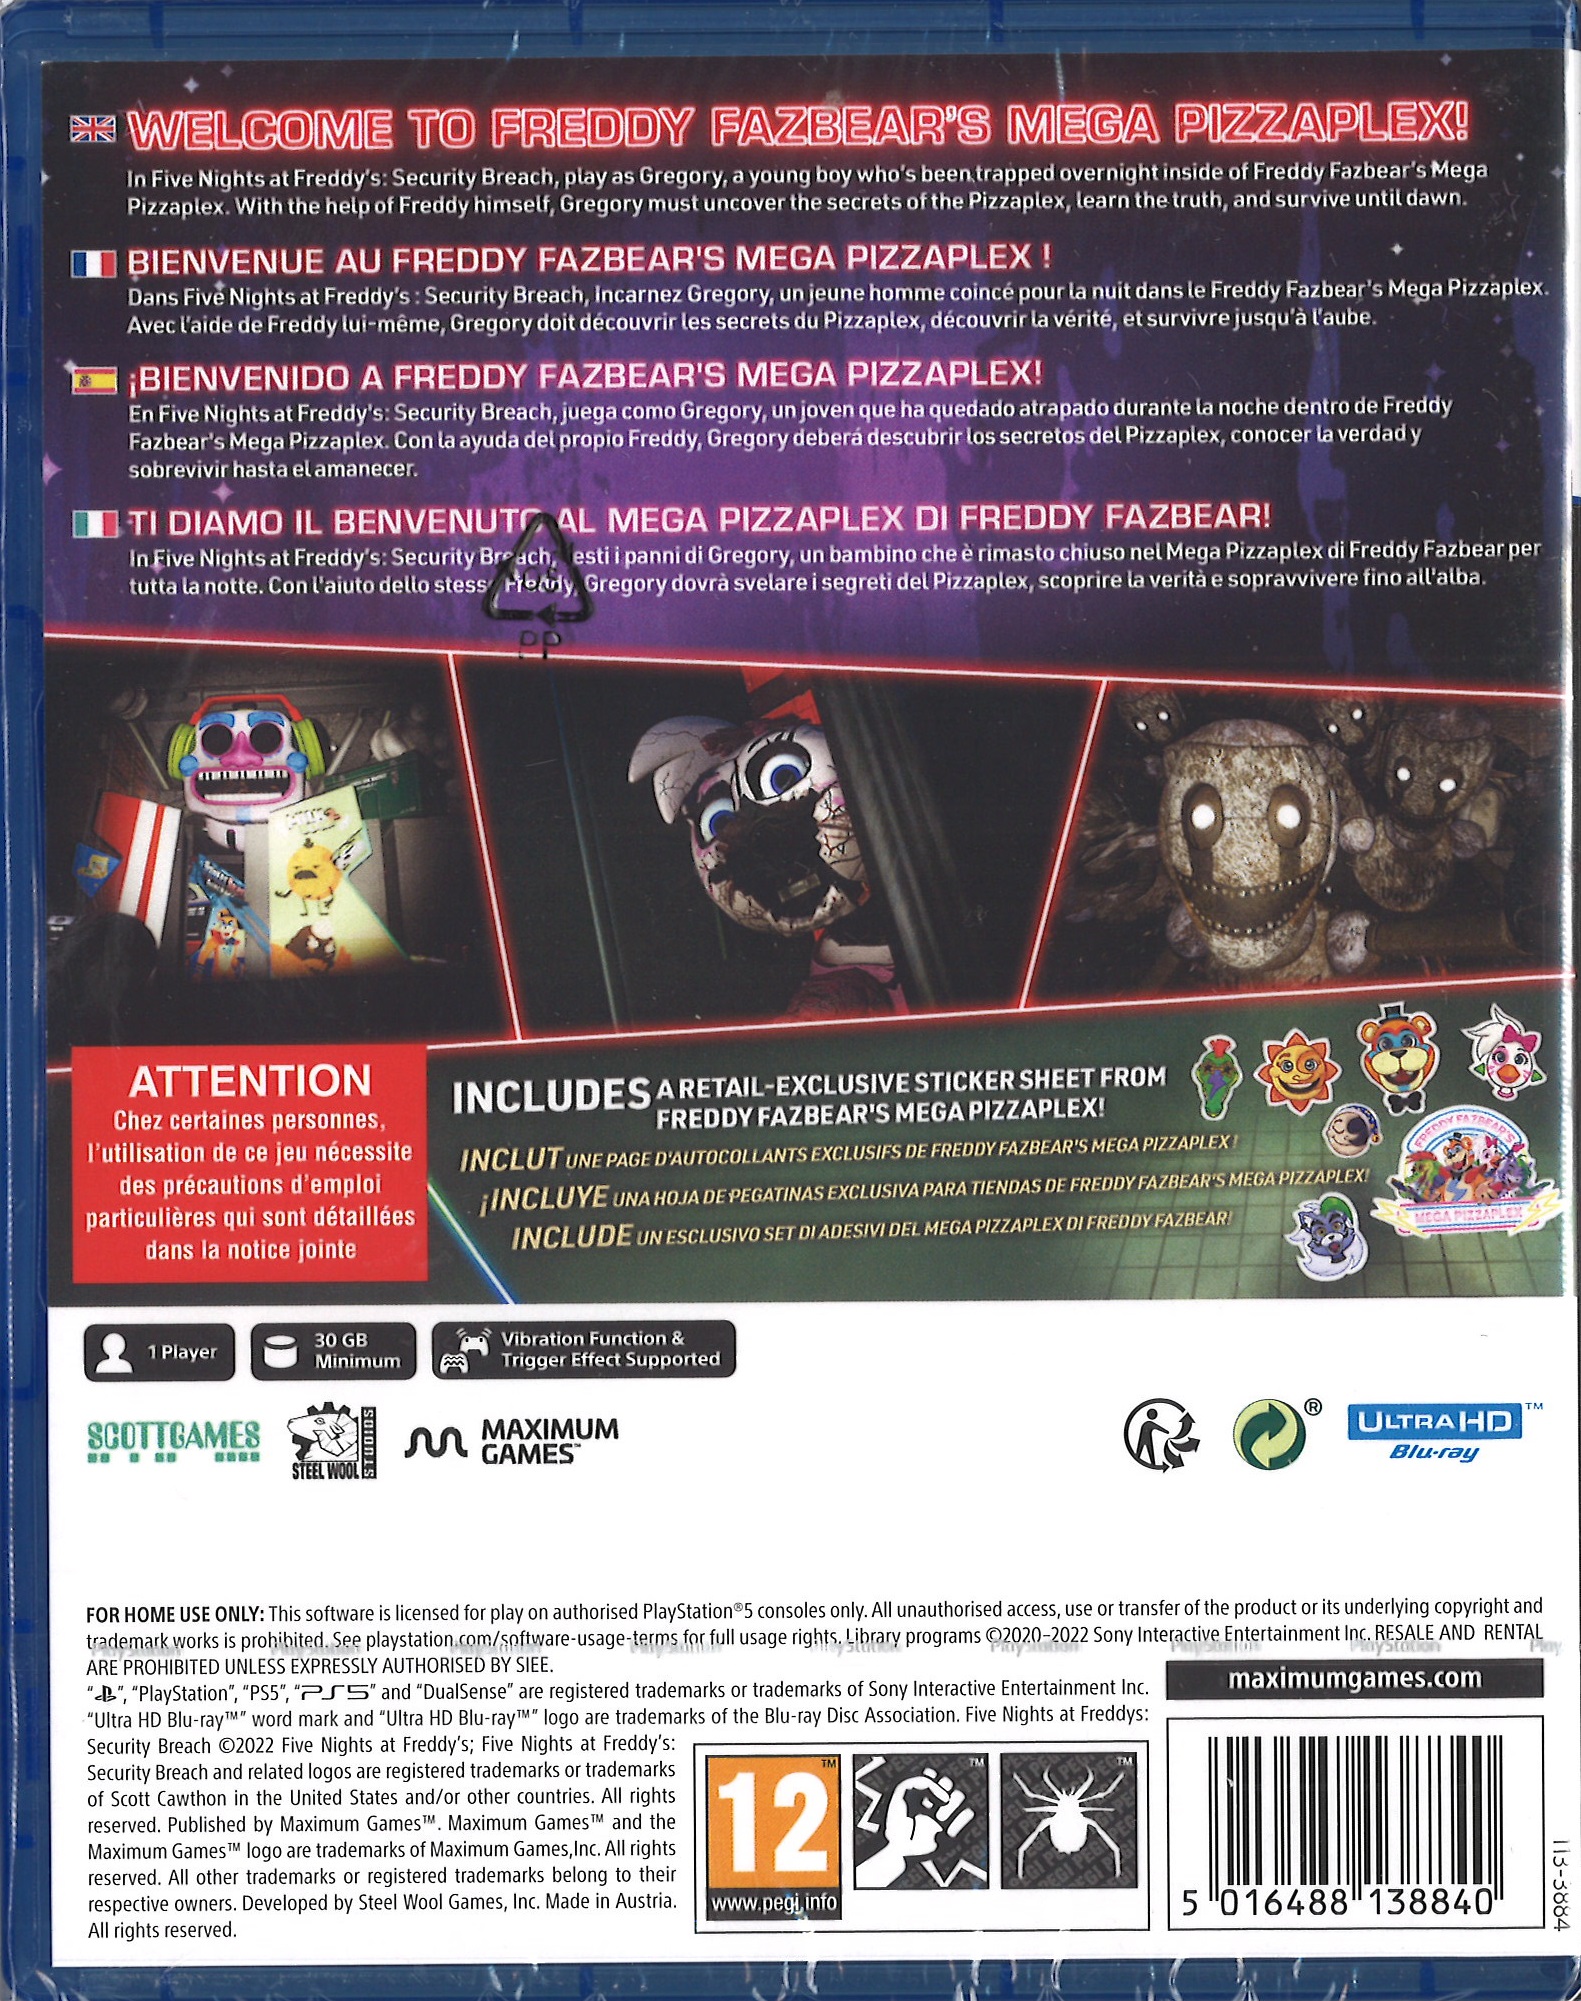 PS5 - Five nights at freddy's security breach - KONSOL CENNETİ at